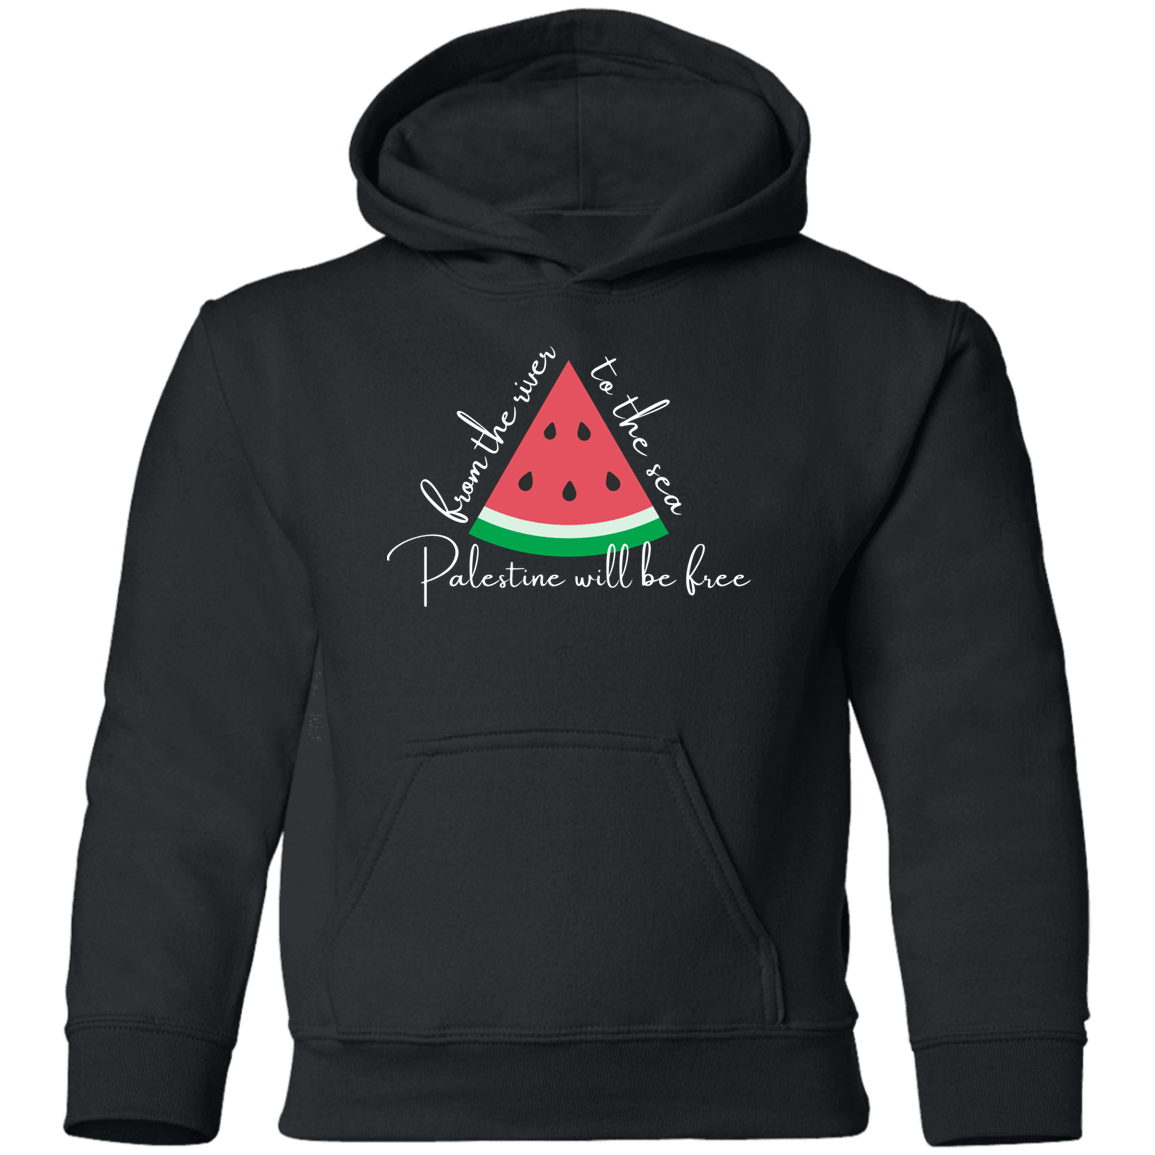 From the River to the Sea Watermelon Kids Hoodie